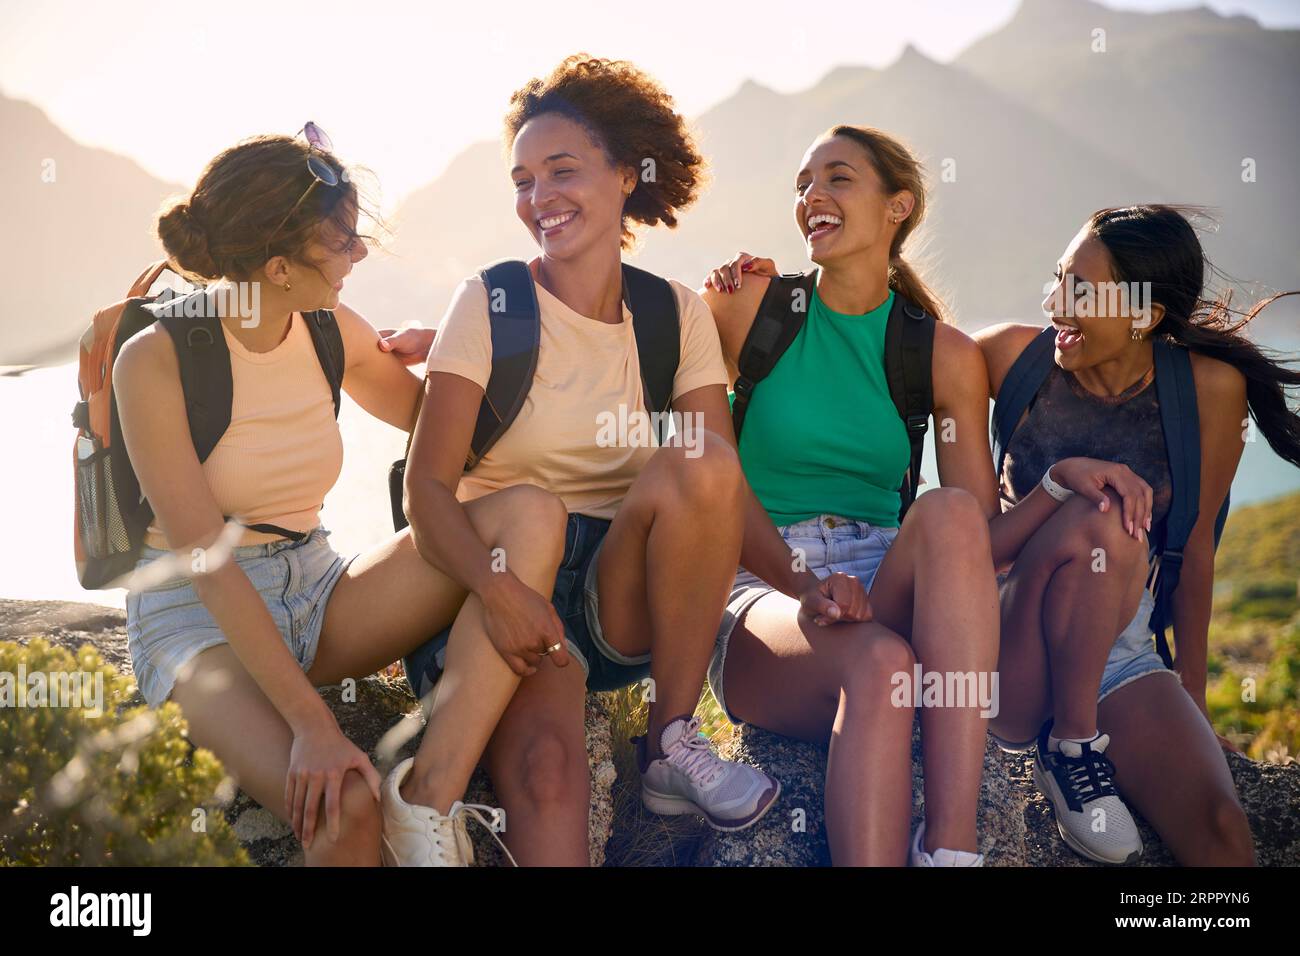 Female Friends With Backpacks On Vacation Taking A Break On Hike Through Countryside Stock Photo